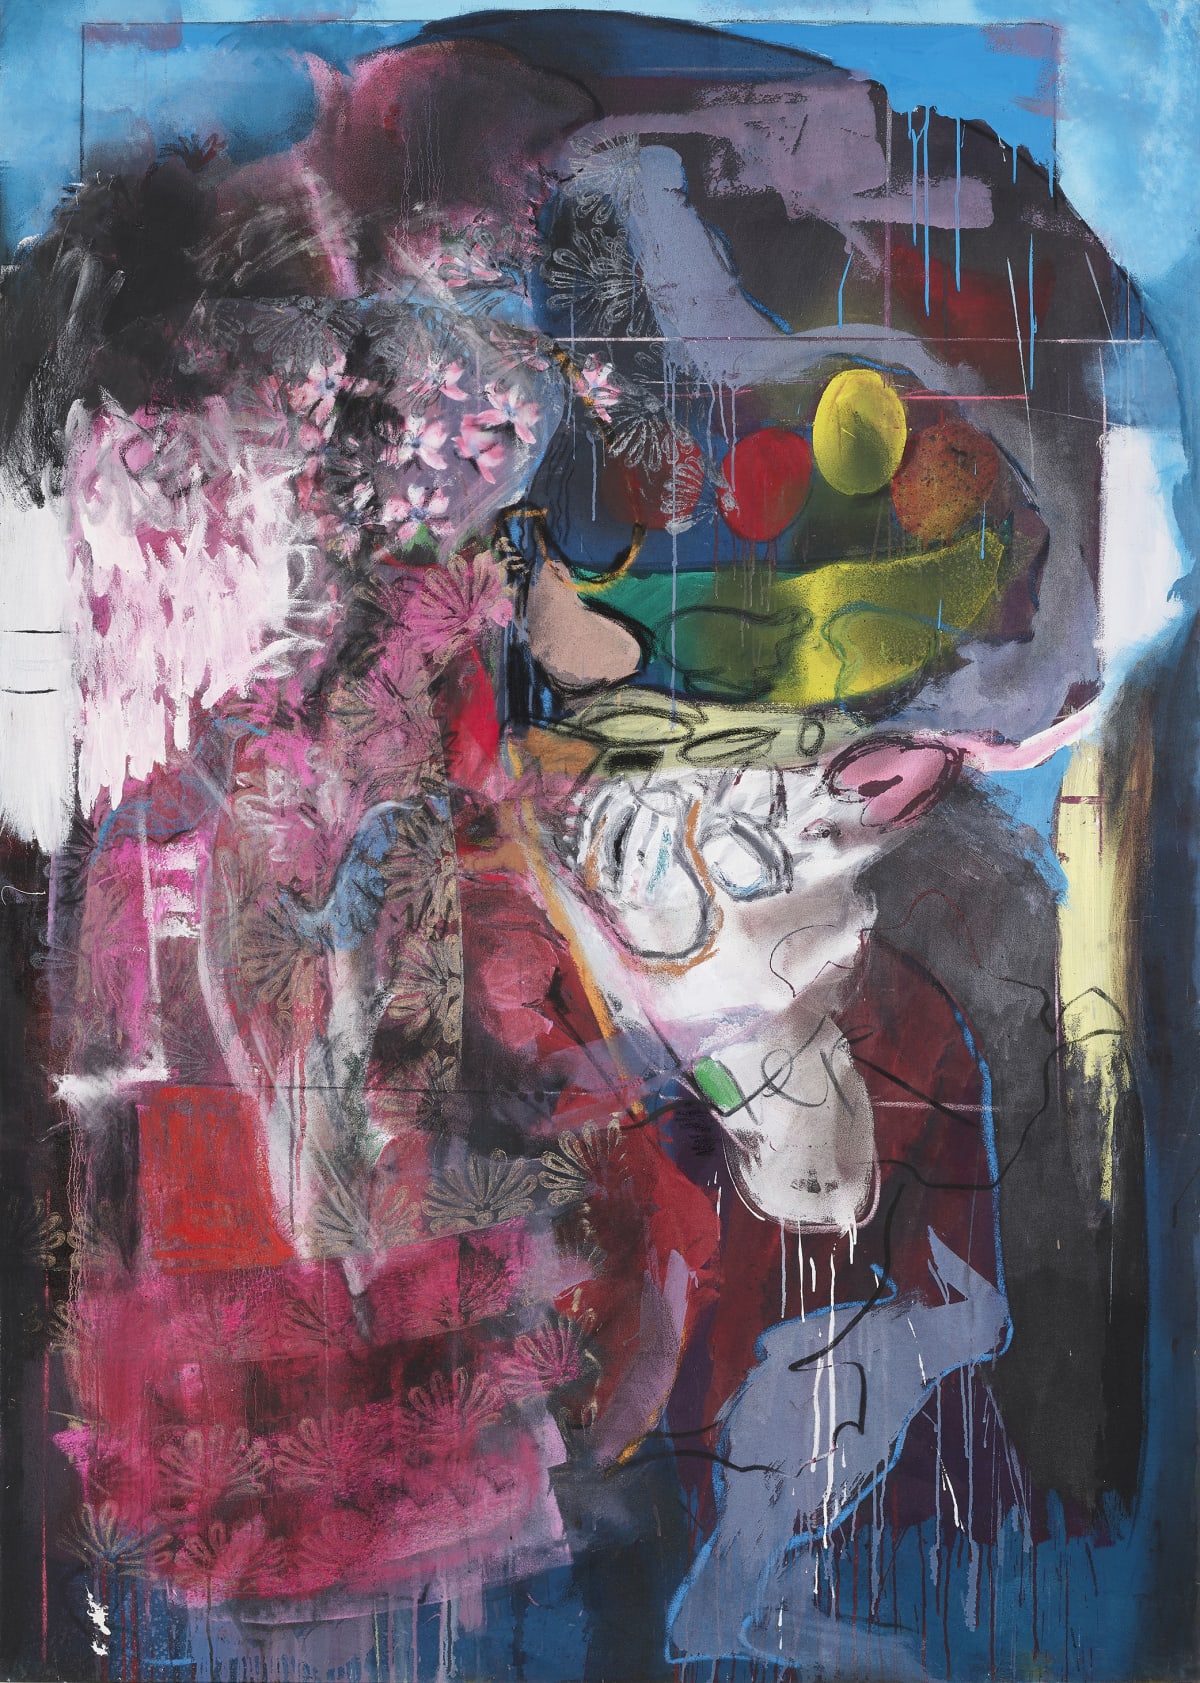 Mary Lovelace O’Neal, TID- Flowers and Still Life, Who Expected It, circa 1990s, mixed media on canvas, 84 x 60 in, signed verso, courtesy the Artist and Jenkins Johnson Gallery